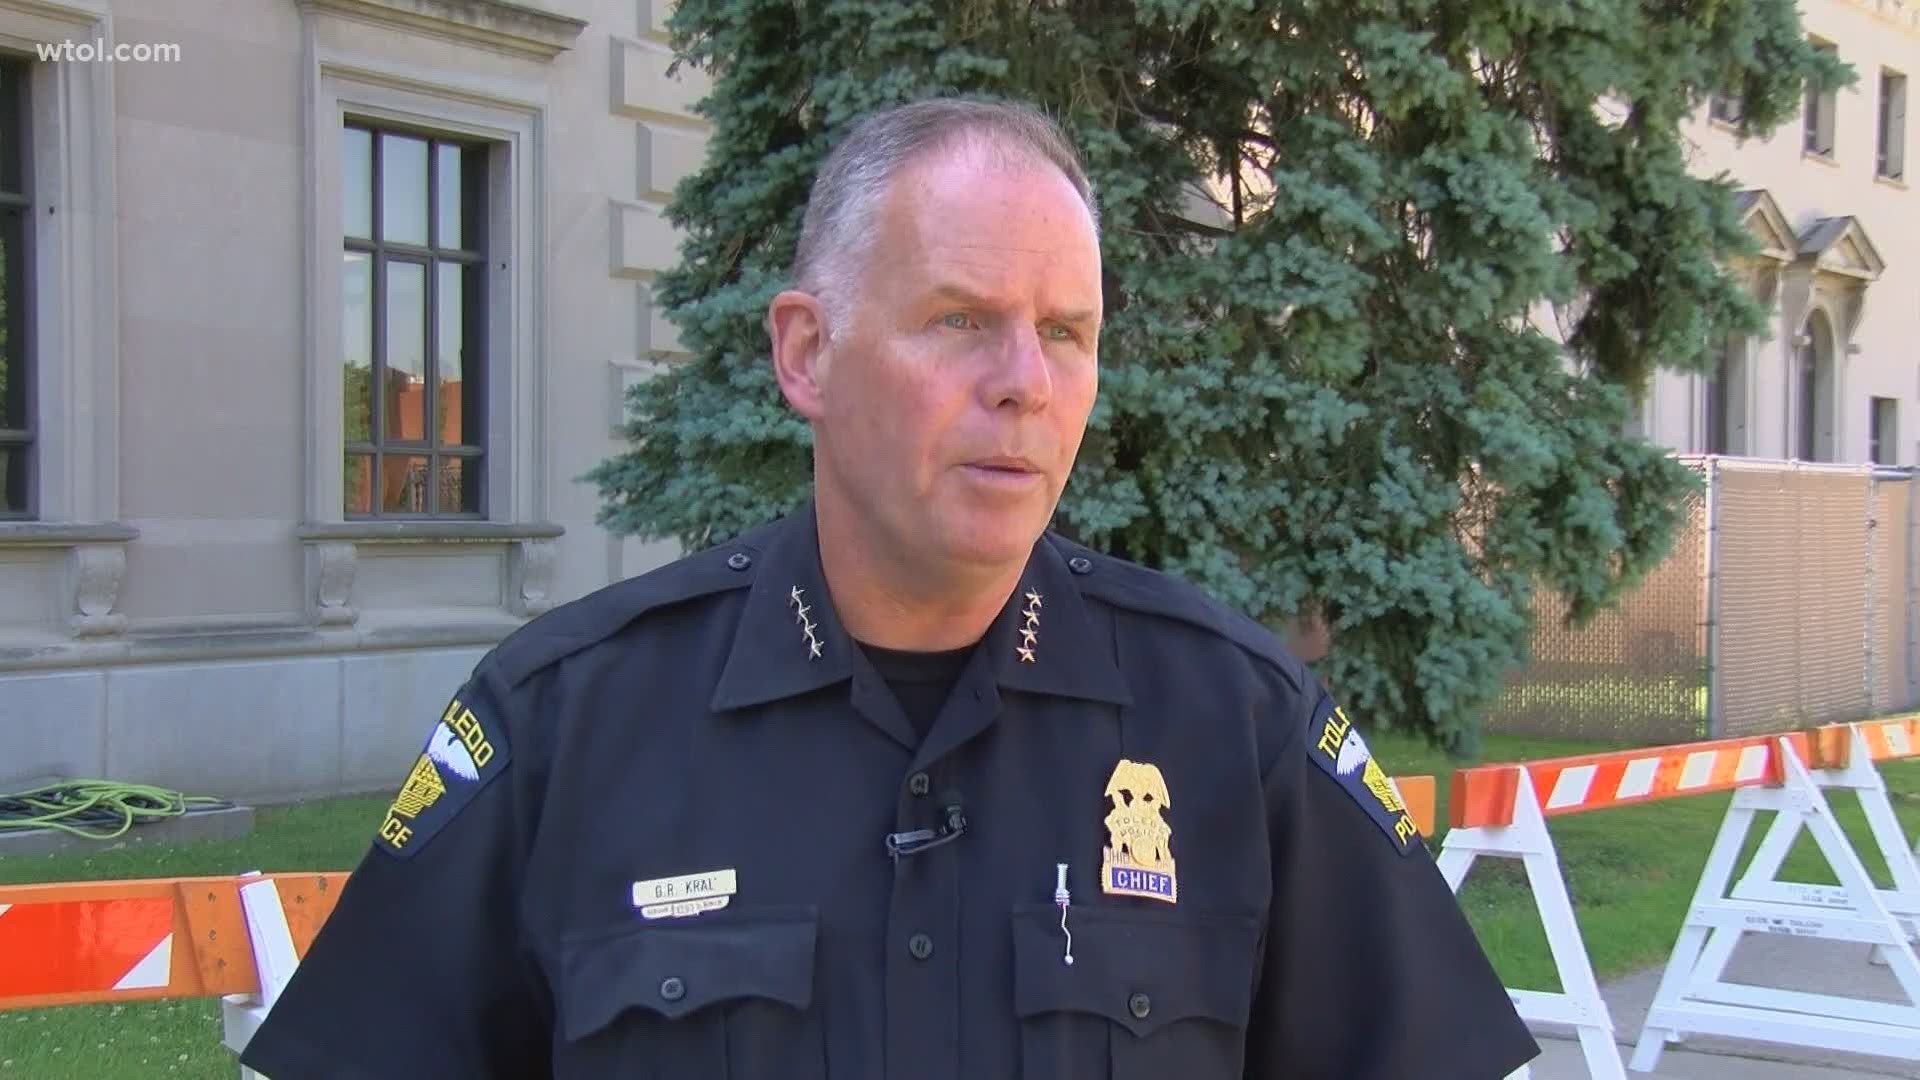 Toledo police chief reacts to newly